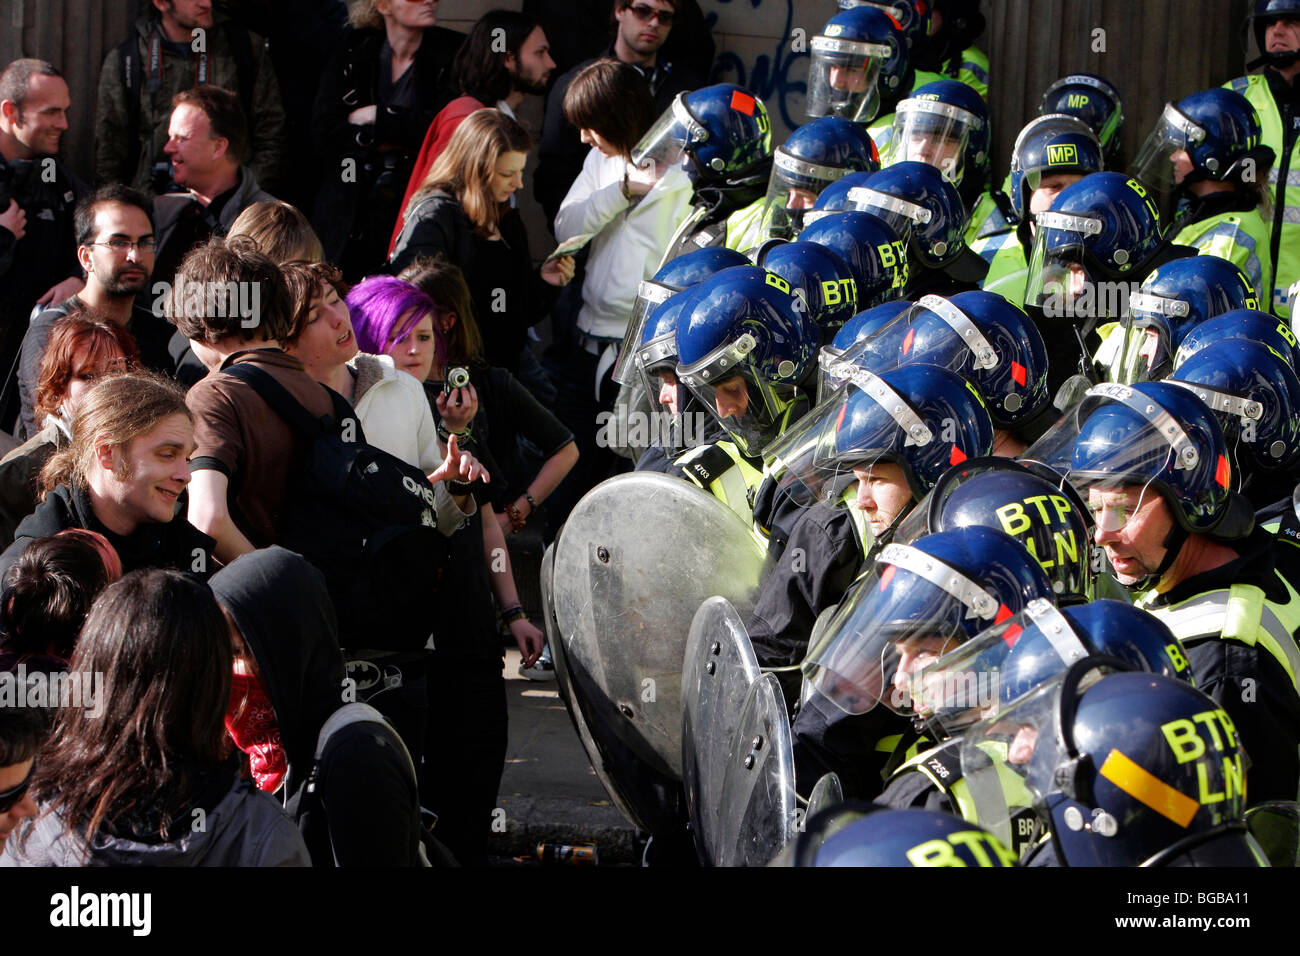 England, London City, Threadneedle Street, Bank of England, G20 Protests April 2009 police with riot shields confront protesters Stock Photo